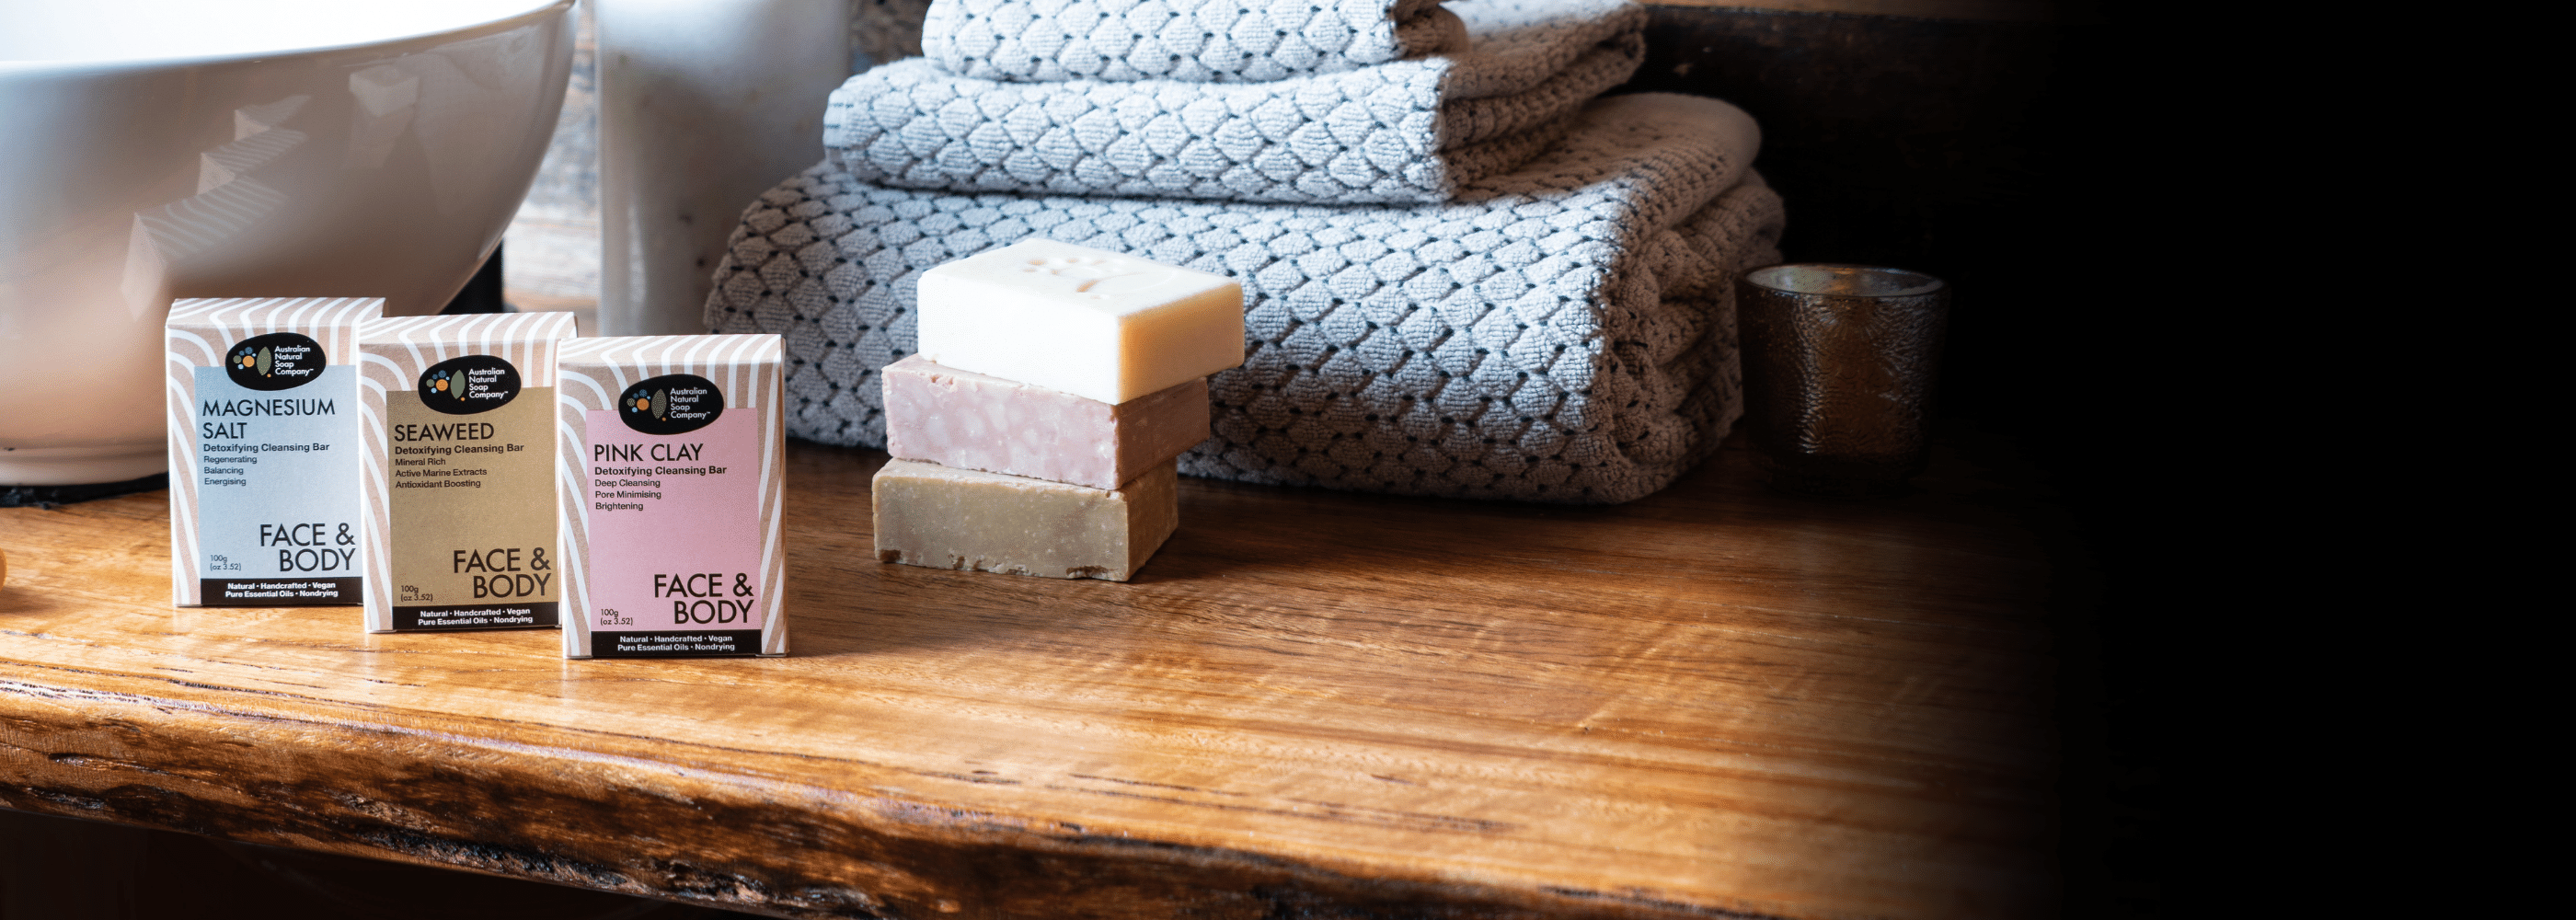 Three skin detox soap bars on a wooden bench